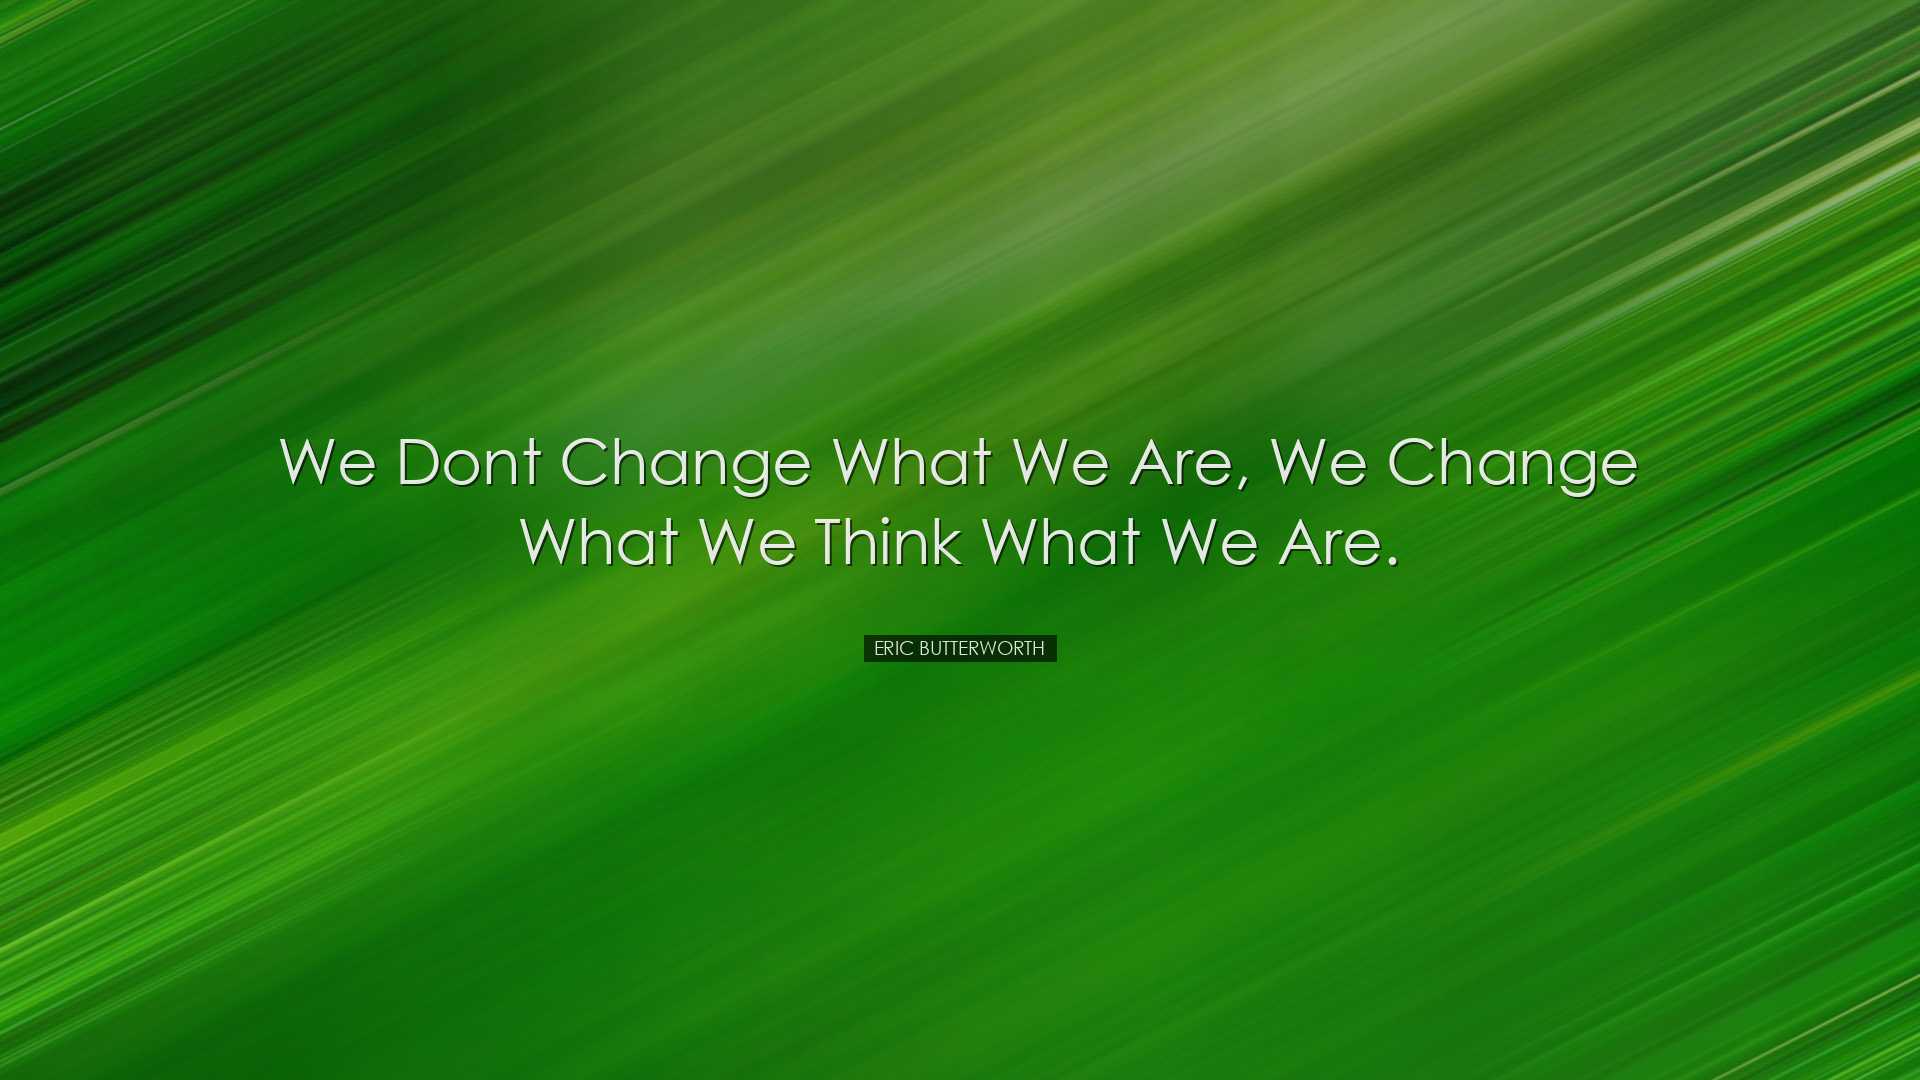 We dont change what we are, we change what we think what we are. -